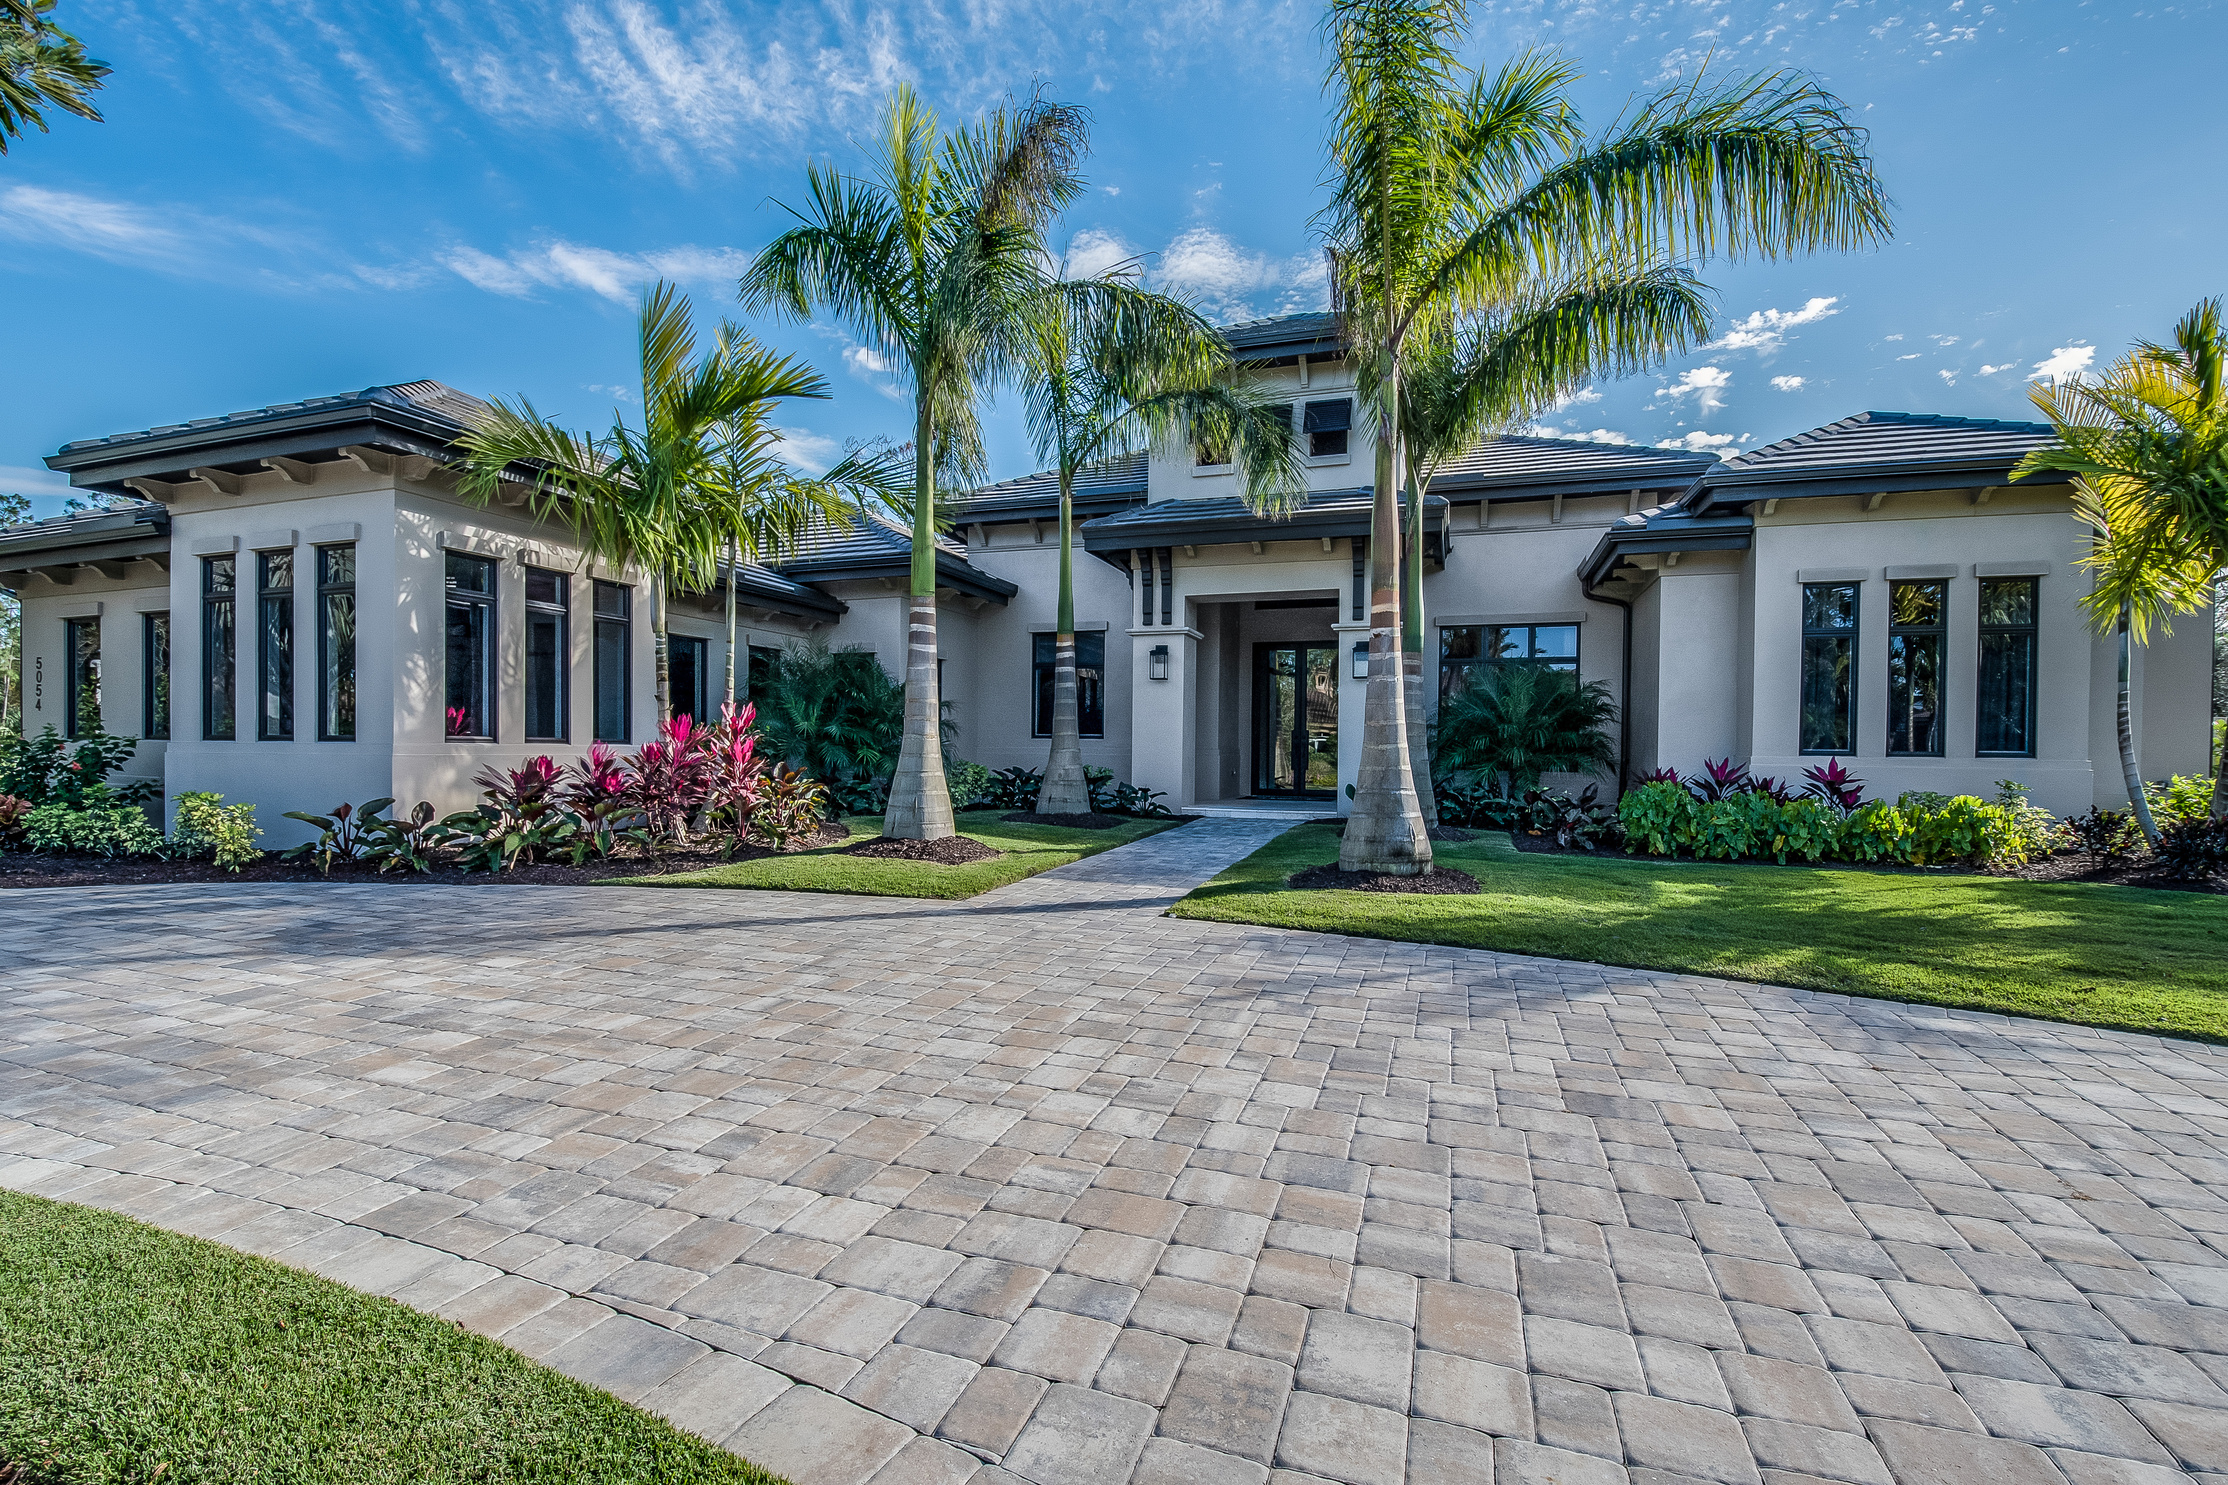 Gorgeous Florida home with stone circle driveway